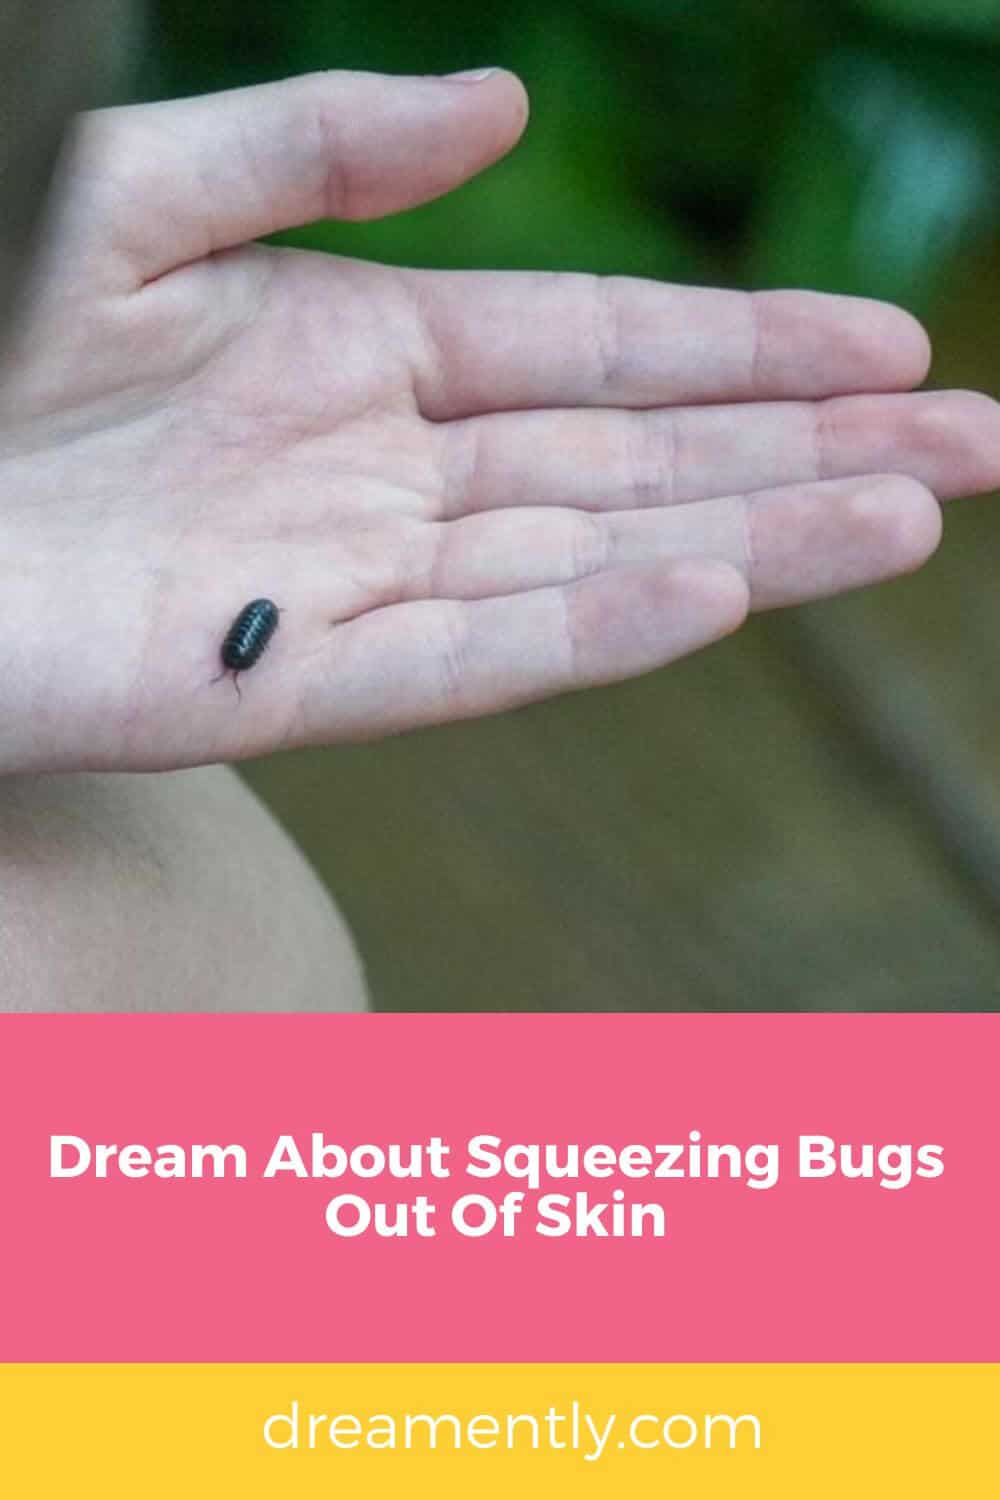 Dream About Squeezing Bugs Out Of Skin (2)